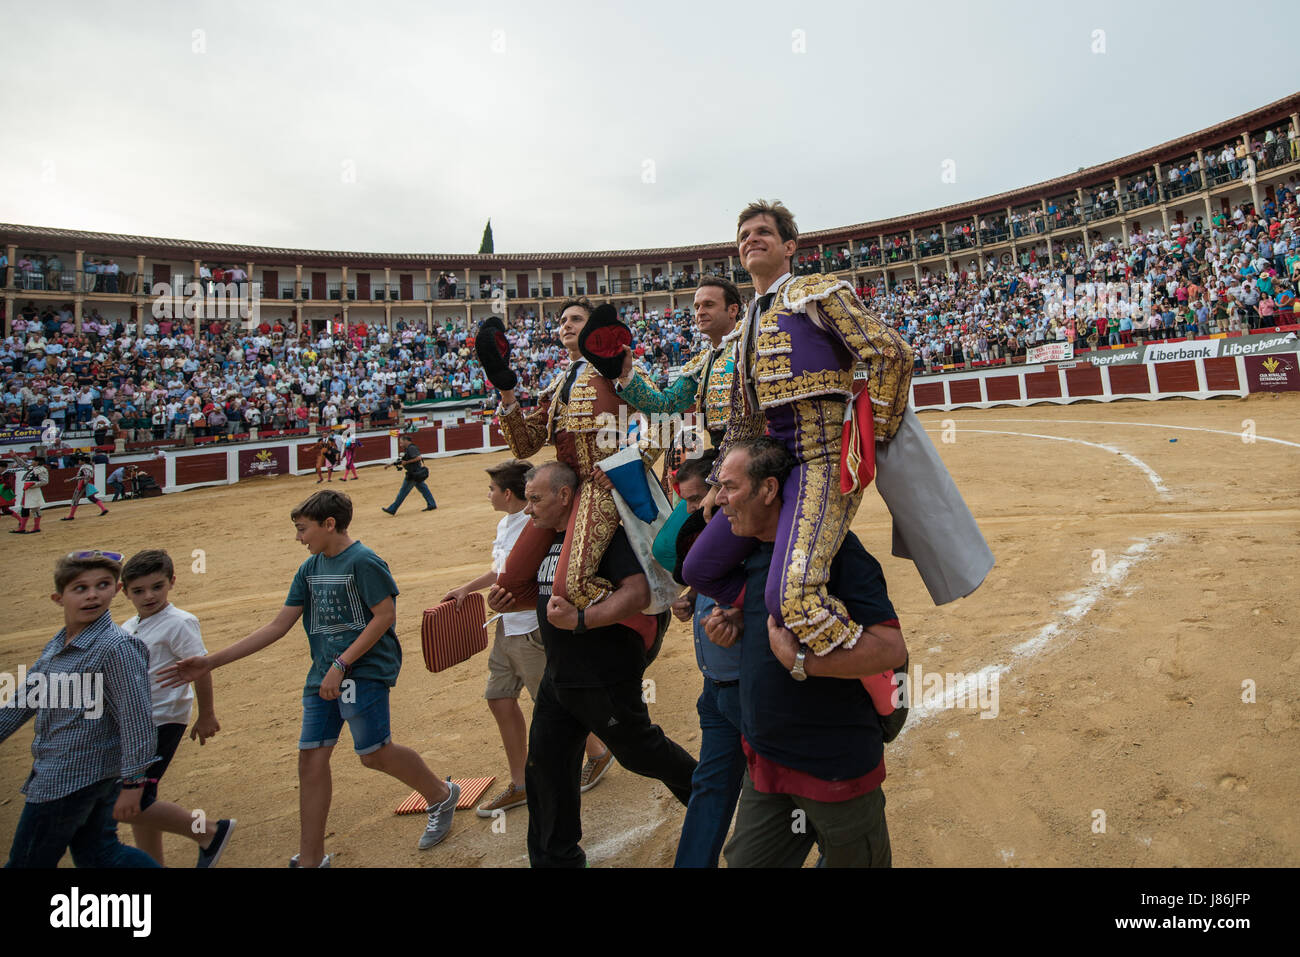 Caceres, Spain. 27th May, 2017. Peruvian bullfighter Andres Roca Rey and Spanish bullfighters Antonio Ferrera and Julián Lopez 'El Juli' are carried on the shoulders of bullfighting fans during the San Fernando Fair at the bullring in Cáceres, Spain. Credit: Esteban Martinena Guerrero/Alamy Live News Stock Photo